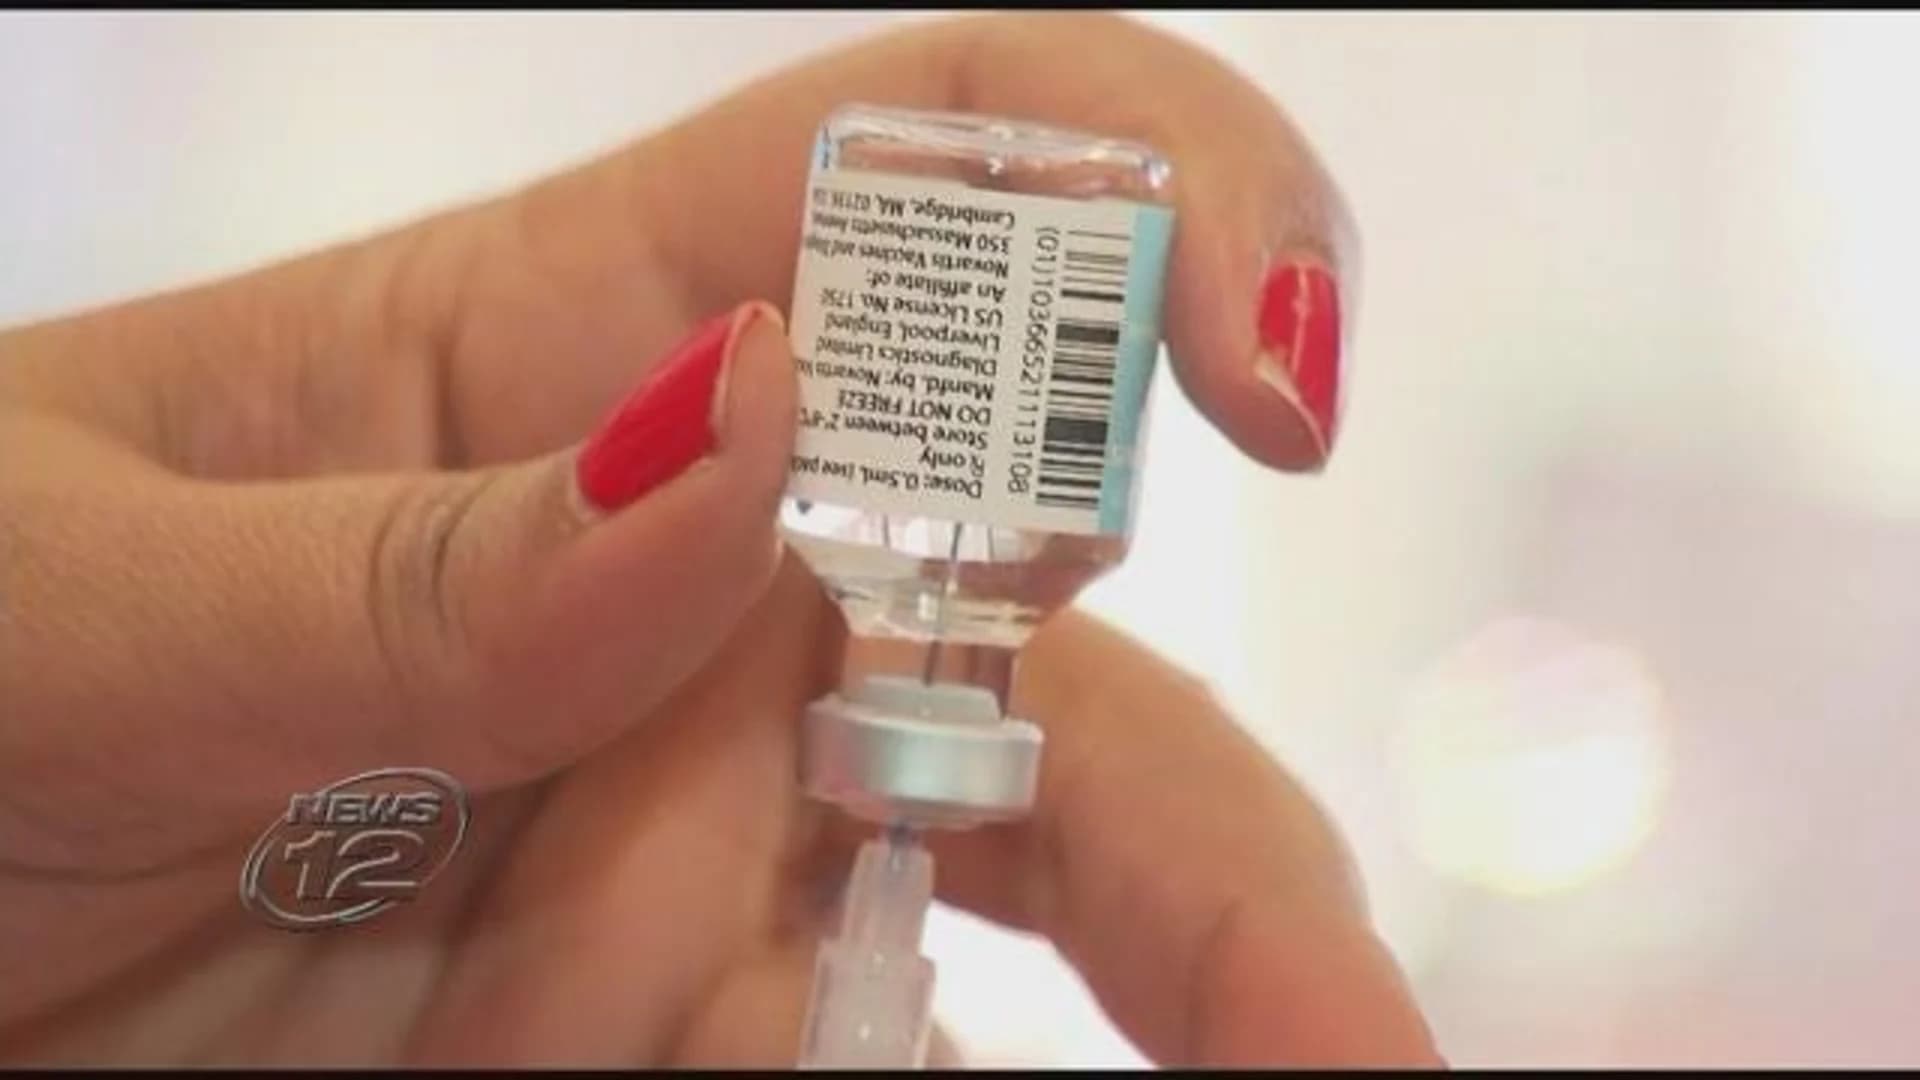 Spurred by measles outbreak, FDA may make vaccines mandatory